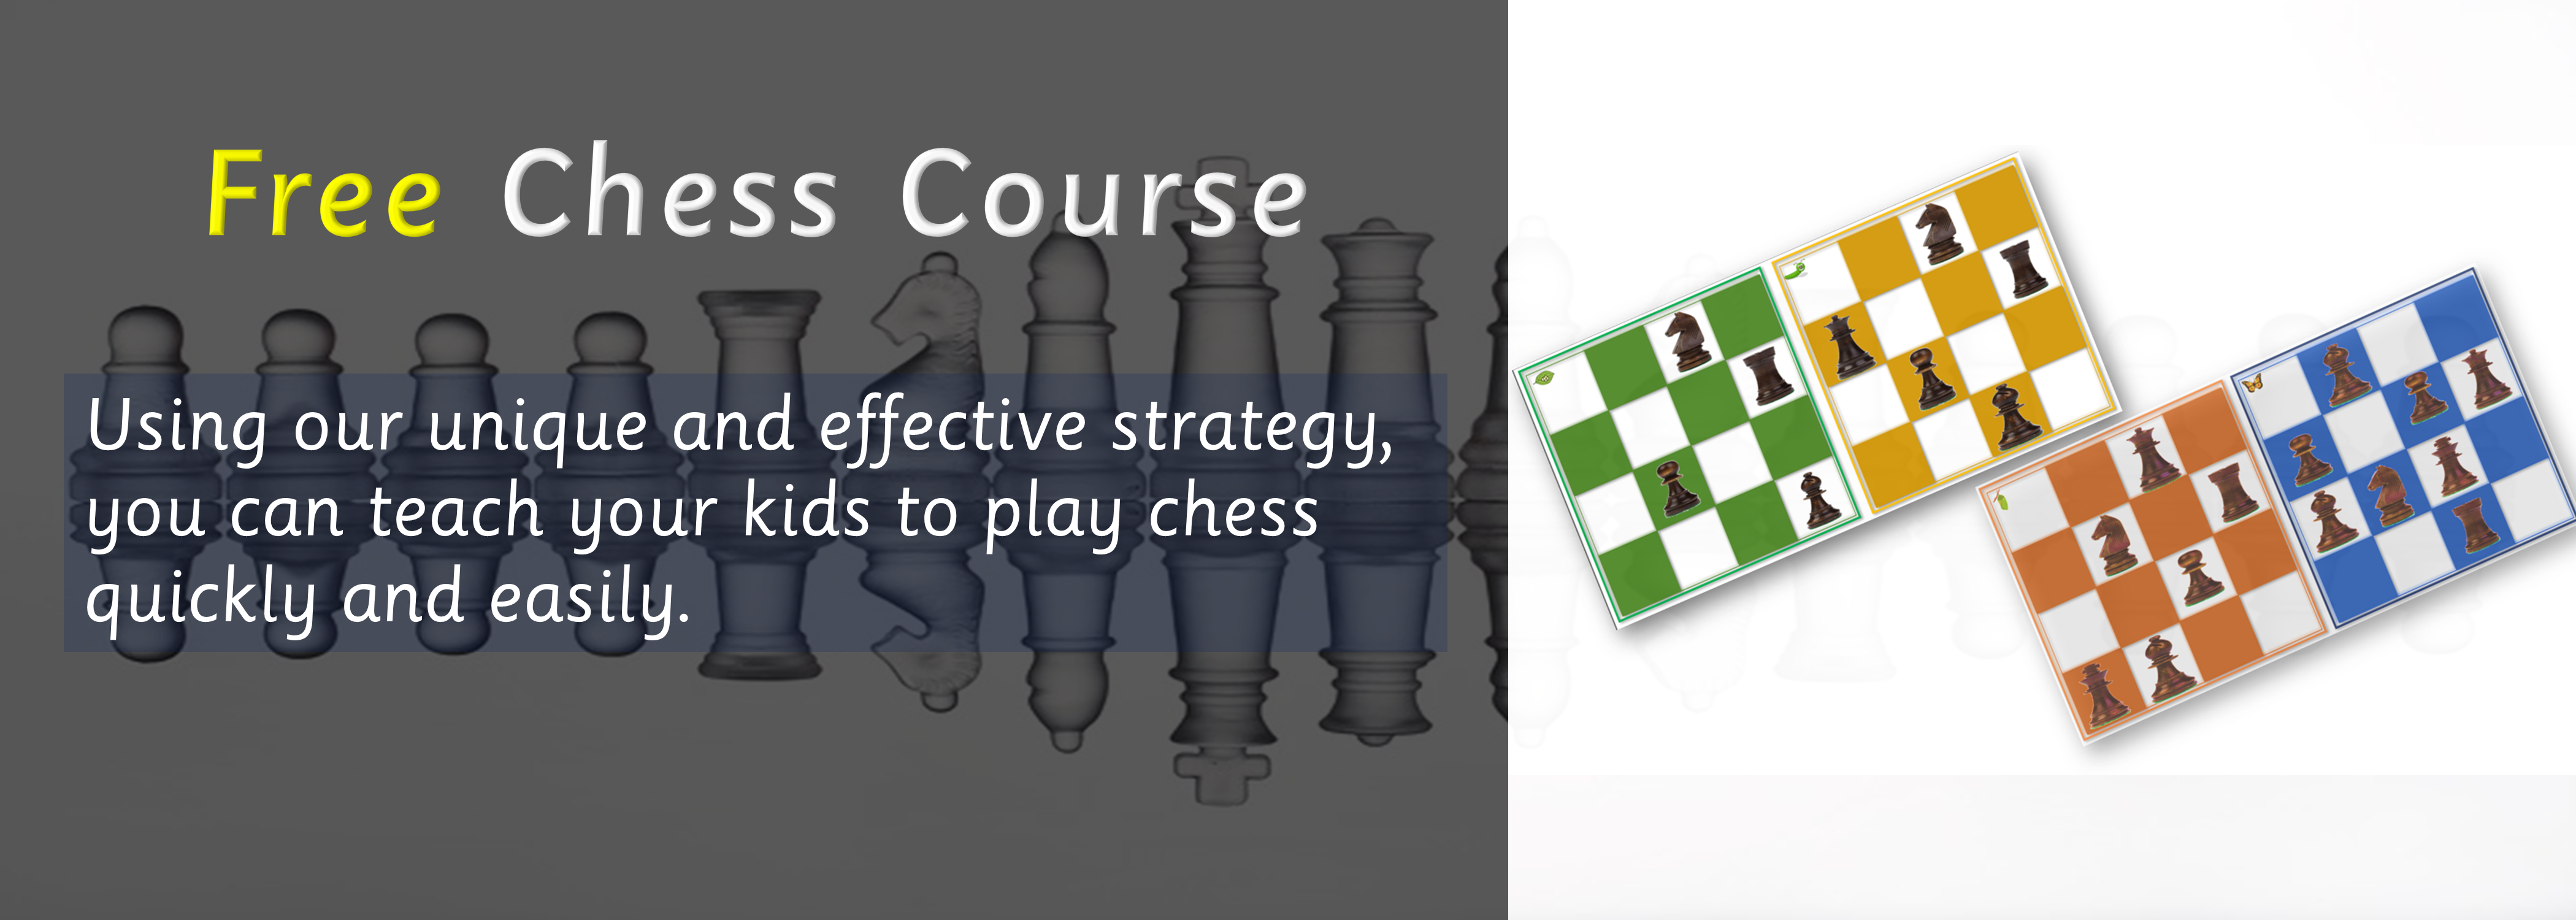 Free Online Chess Course